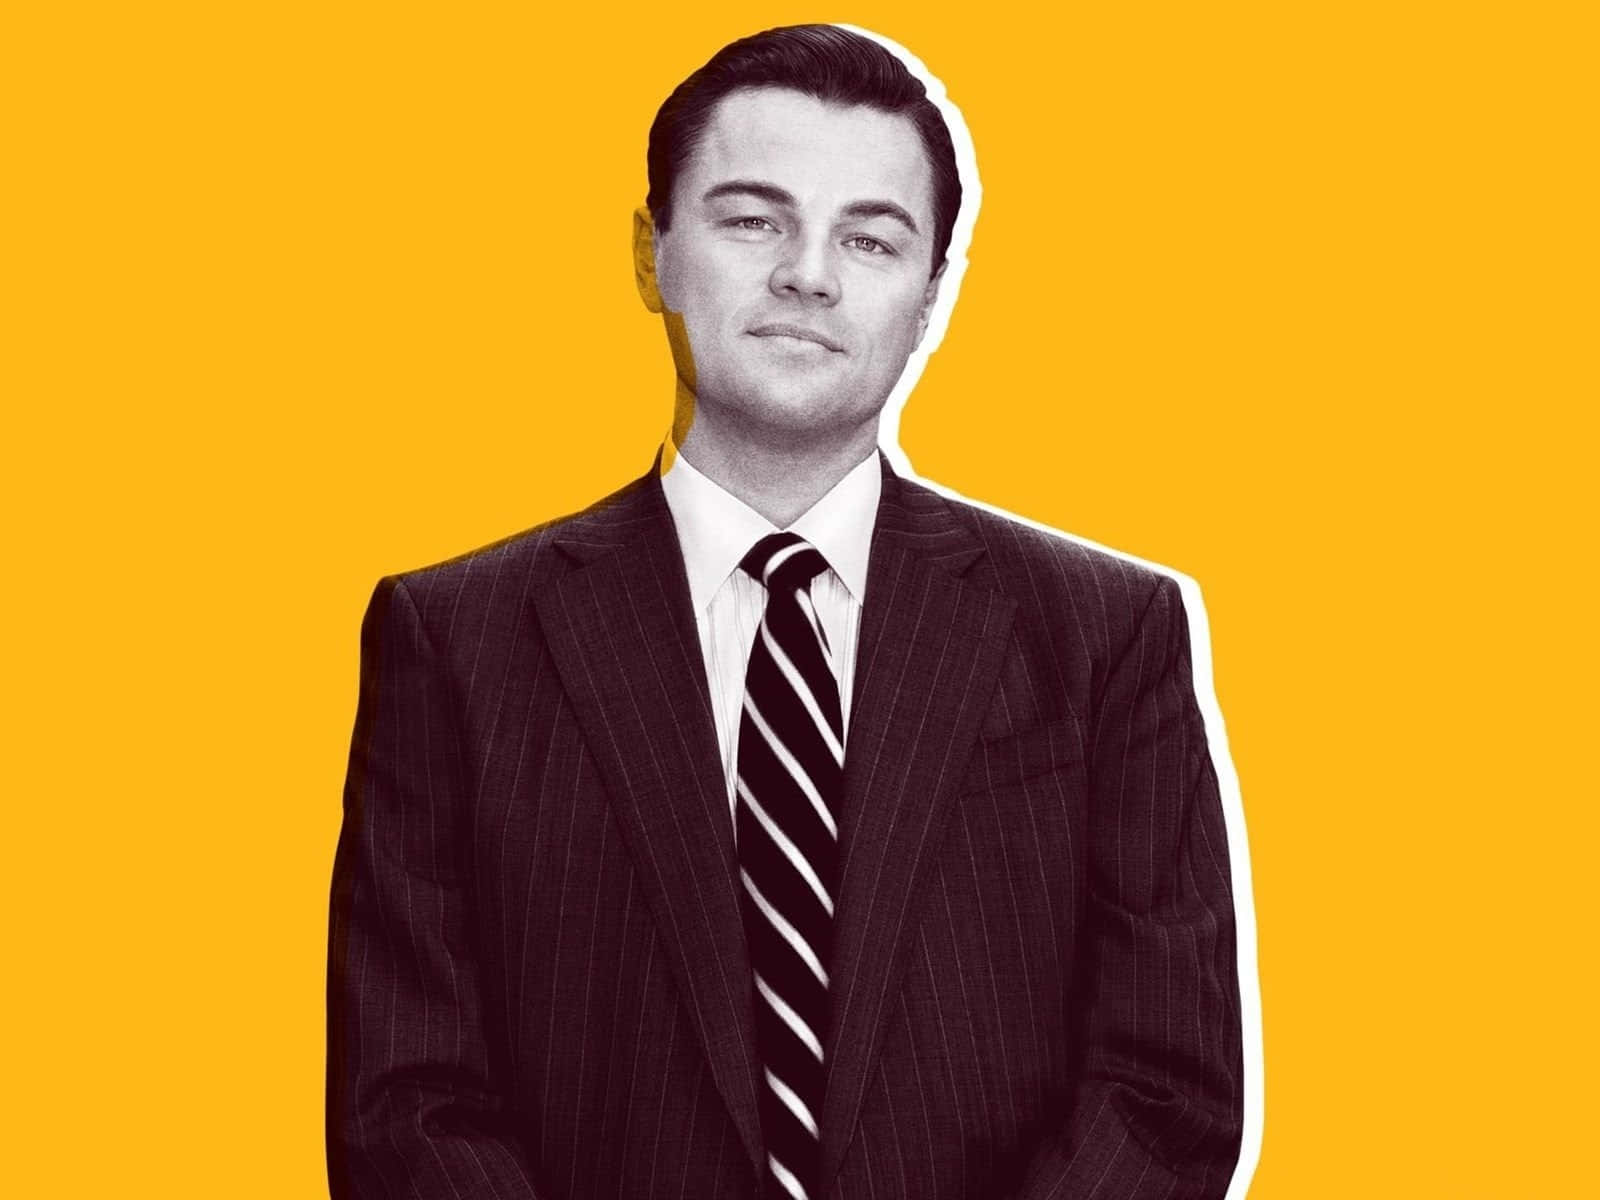 Leonardo Dicaprio As Rogue Trader Jordan Belfort In Martin Scorsese's Academy Award Nominated Movie, The Wolf Of Wall Street. Background